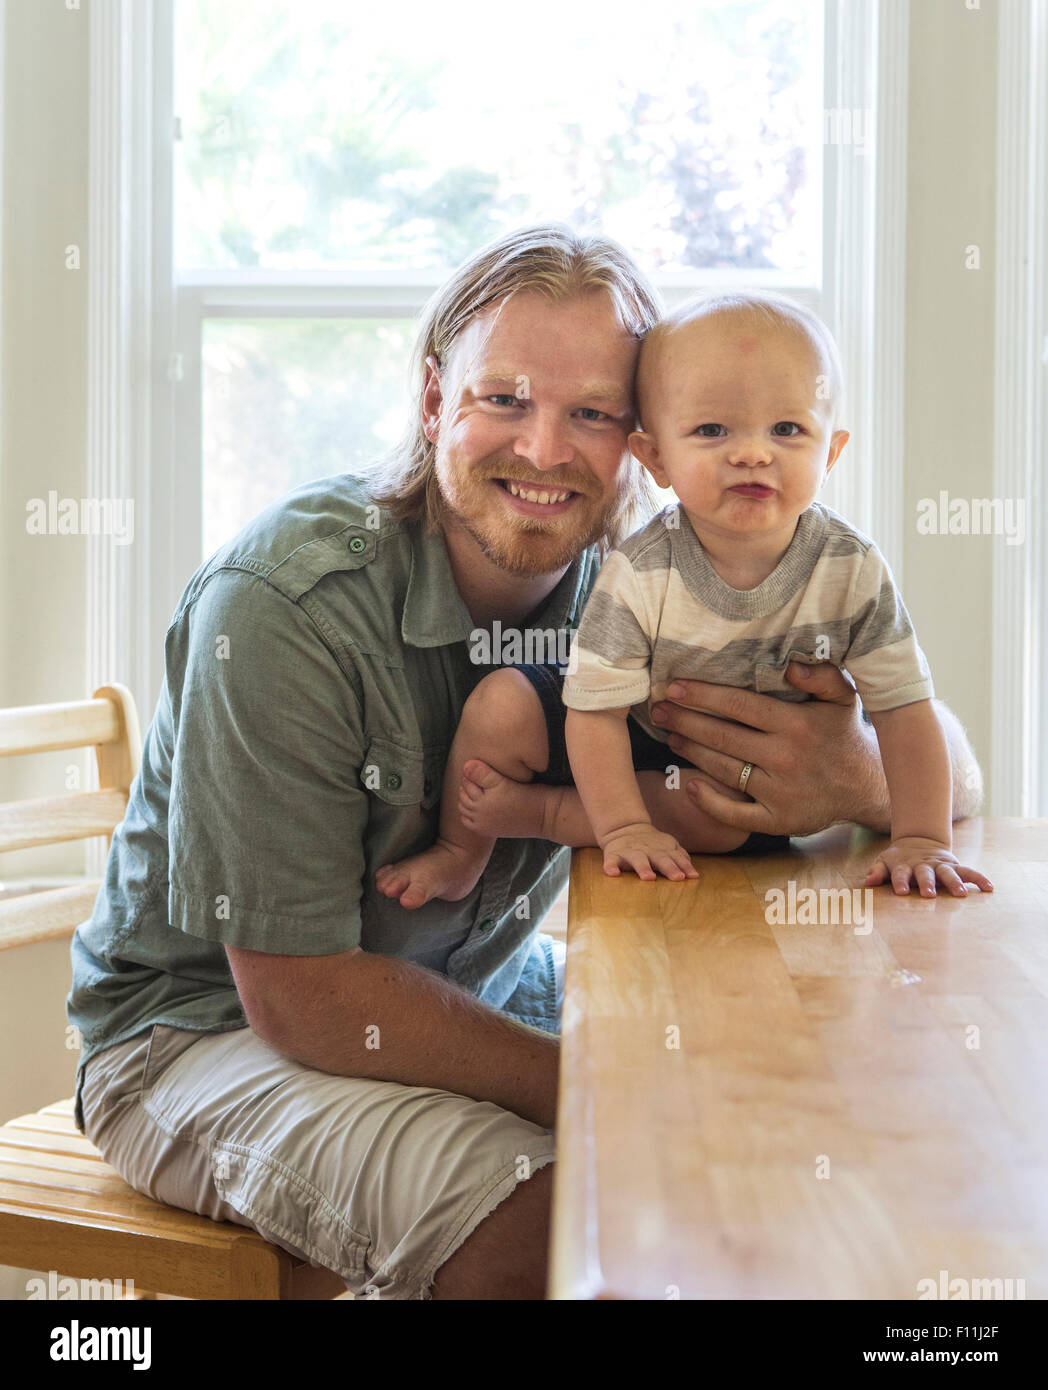 Caucasian father and son smiling at table Stock Photo